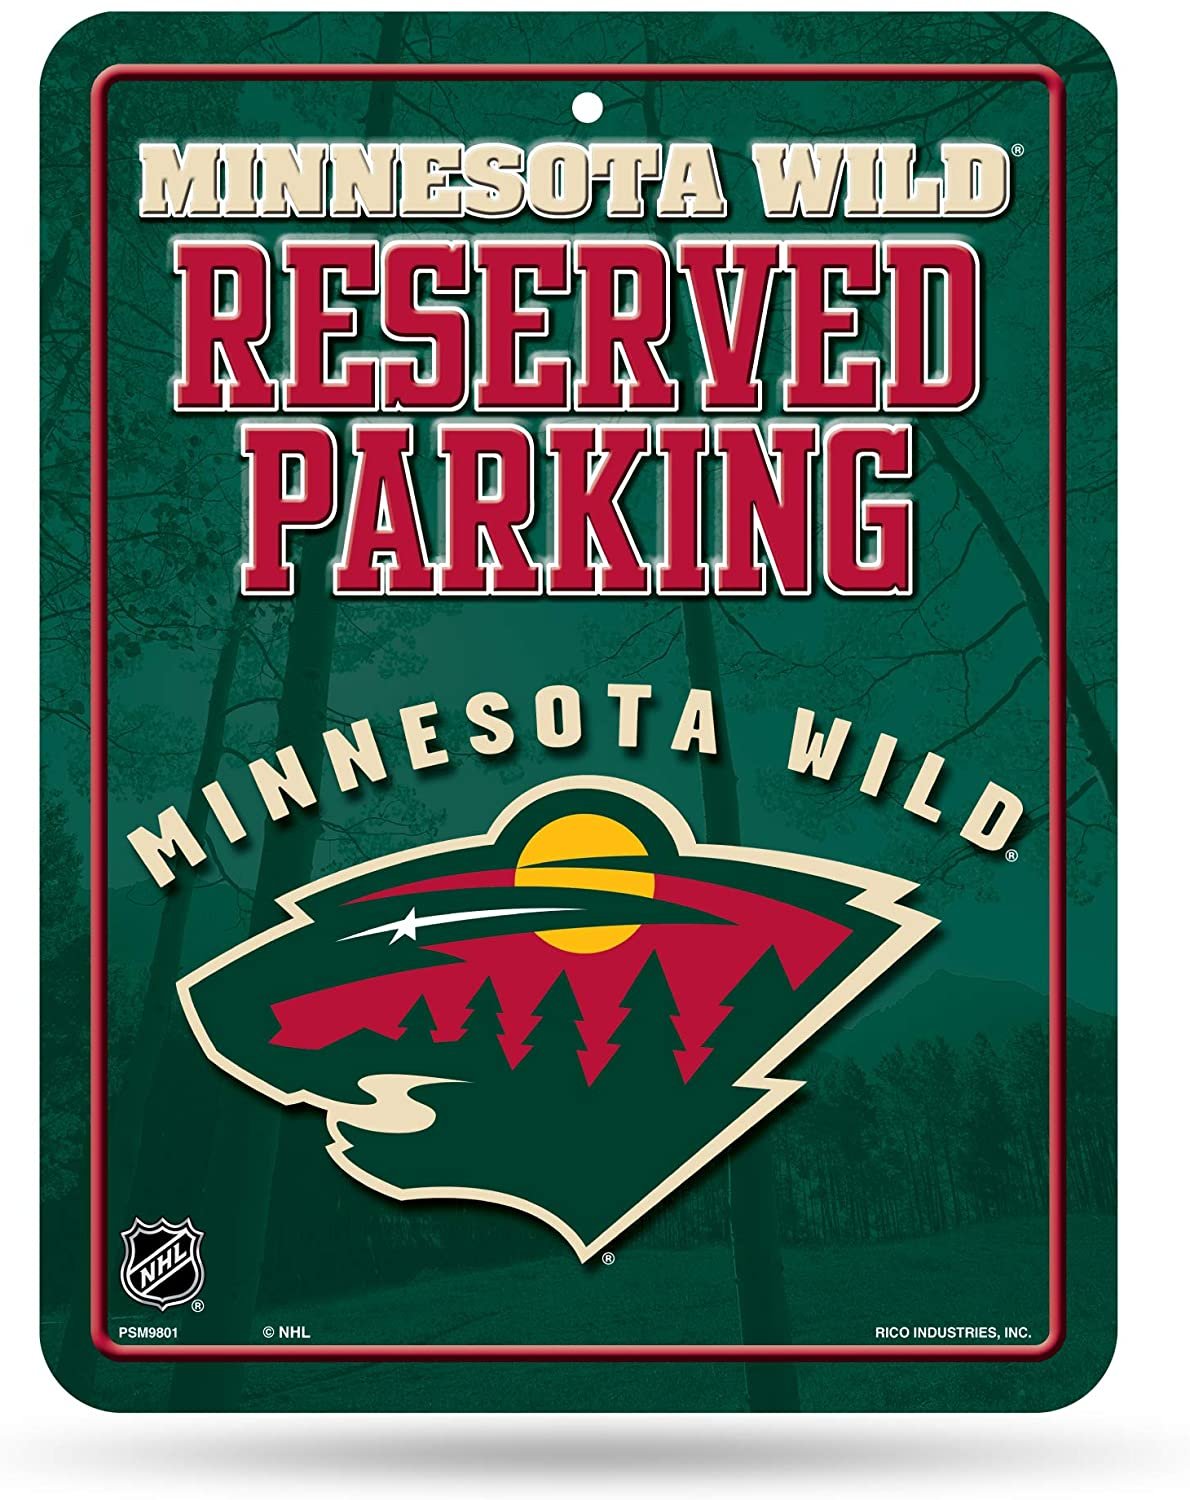 Minnesota Wild 8-Inch by 11-Inch Metal Parking Sign Décor